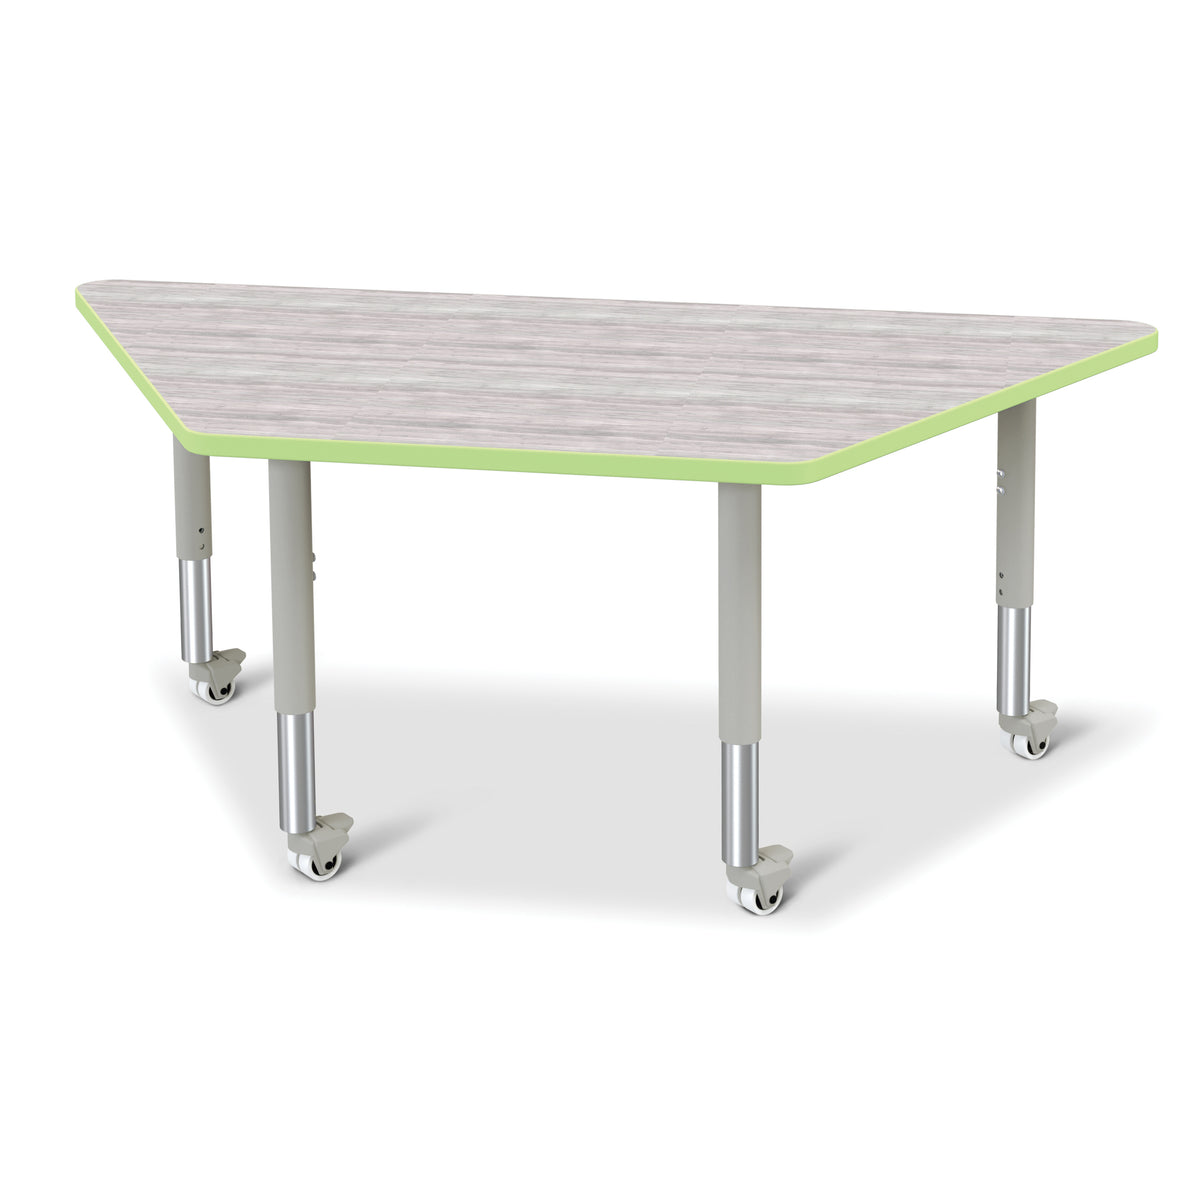 6443JCM451, Berries Trapezoid Activity Table - 30" X 60", Mobile - Driftwood Gray/Key Lime/Gray